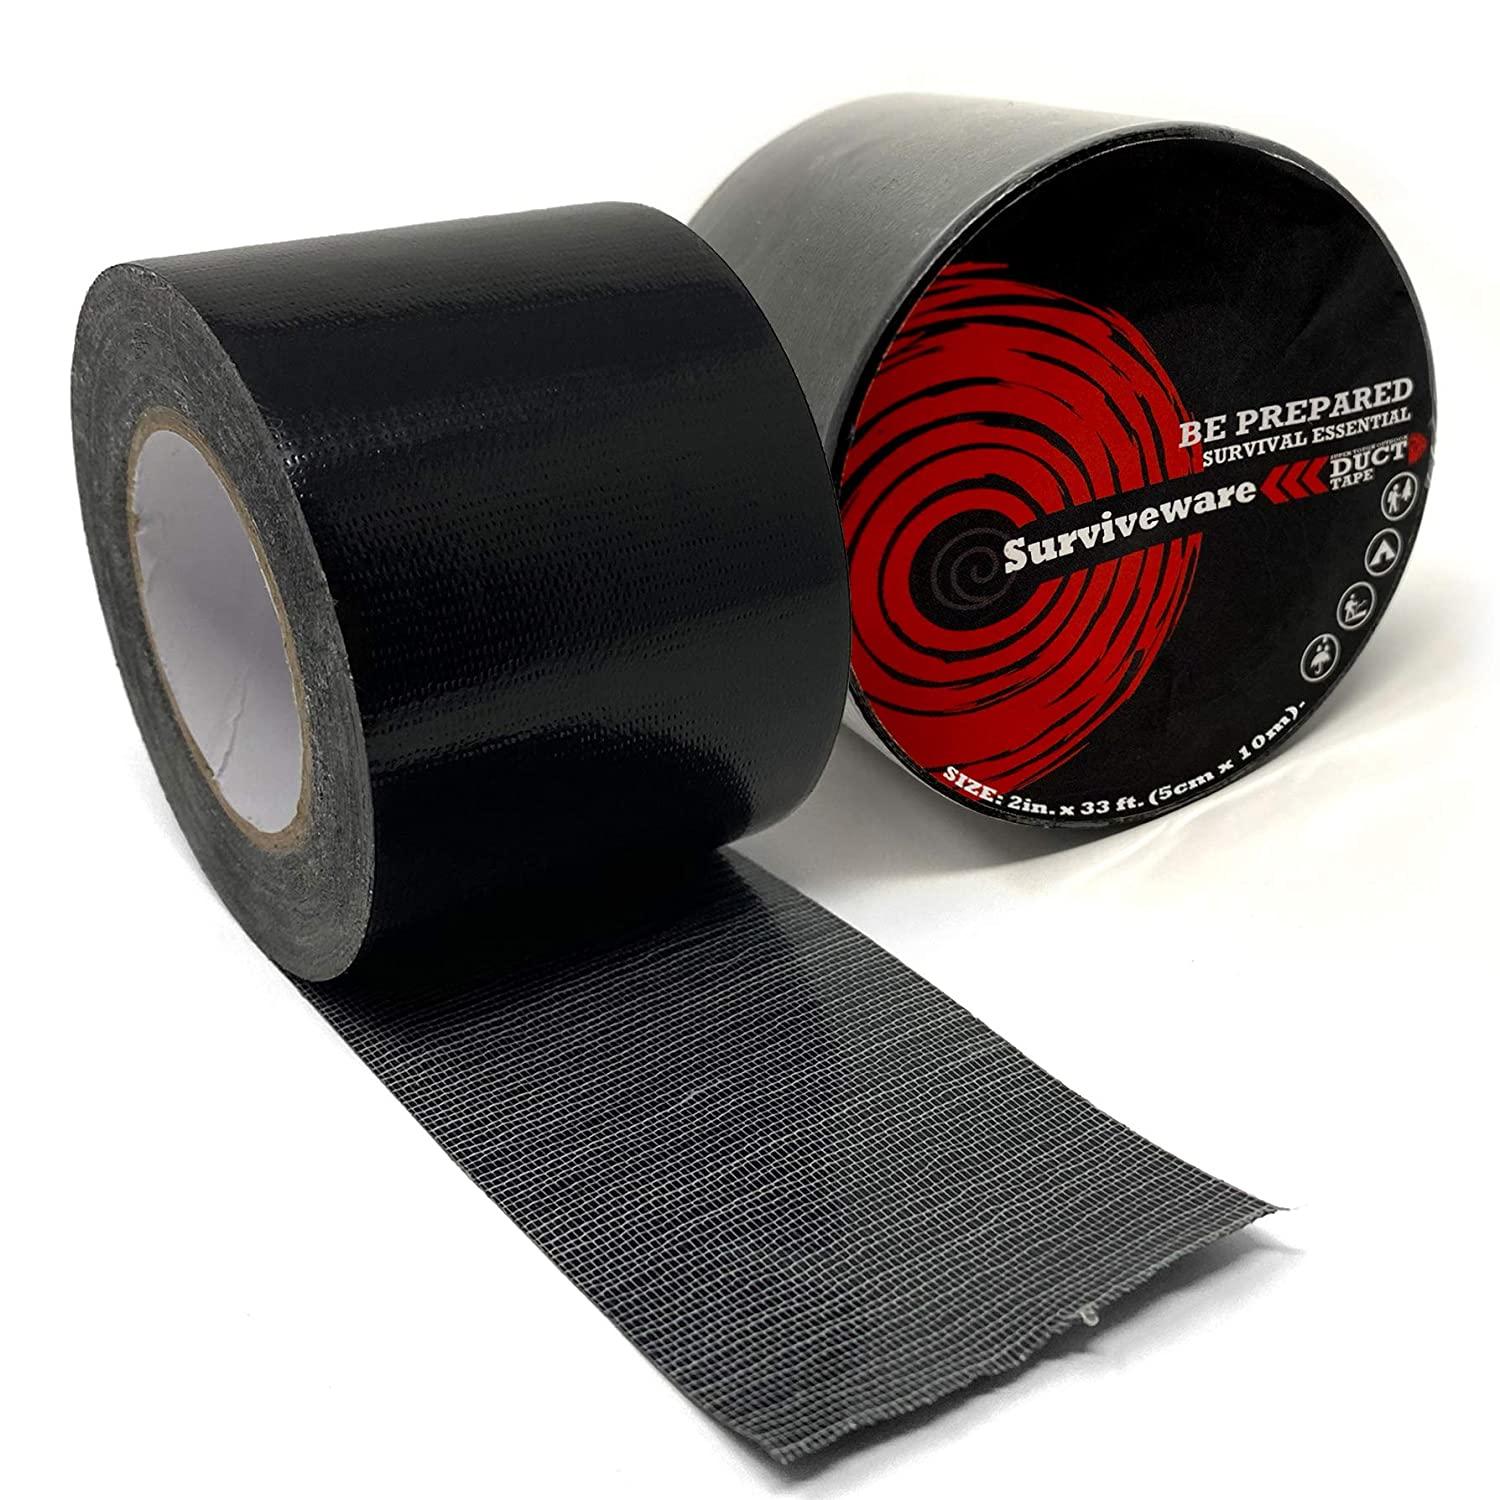 Surviveware Waterproof Duct Tape, Heavy Duty with Easy Tear Technology for  Camping, Outdoors Adventures and Survival Kits